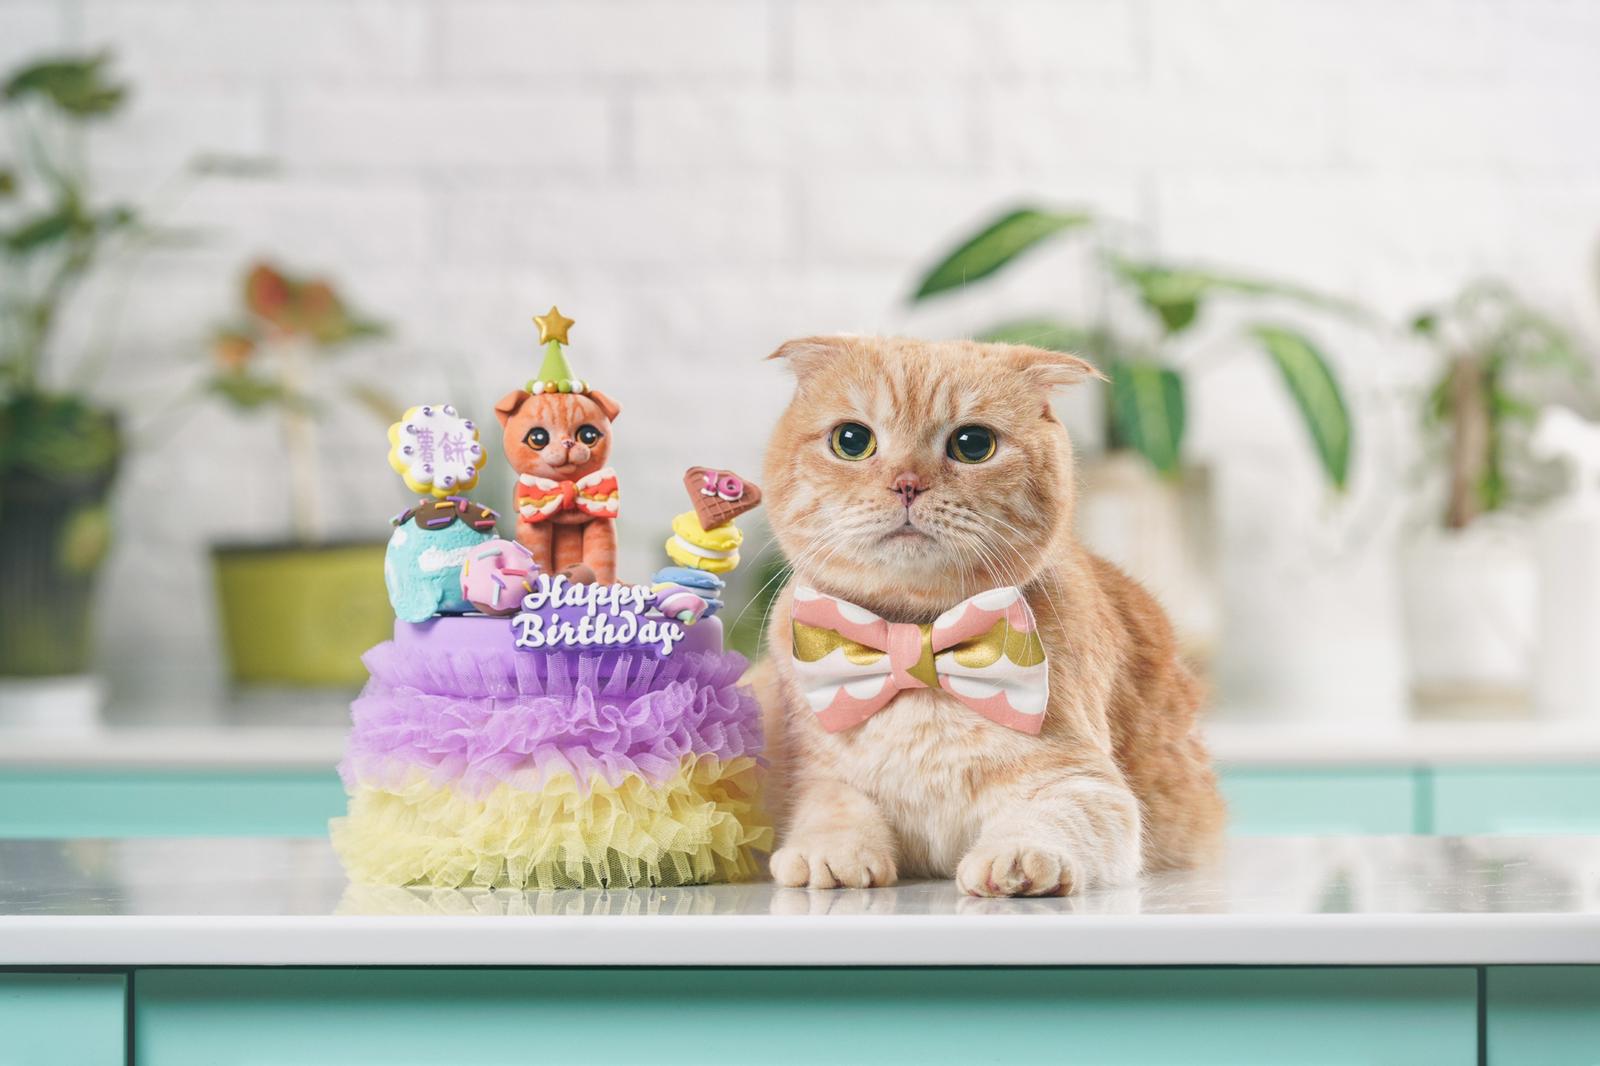 Pet's Pâtisserie: Birthday Treats for your Furkids!